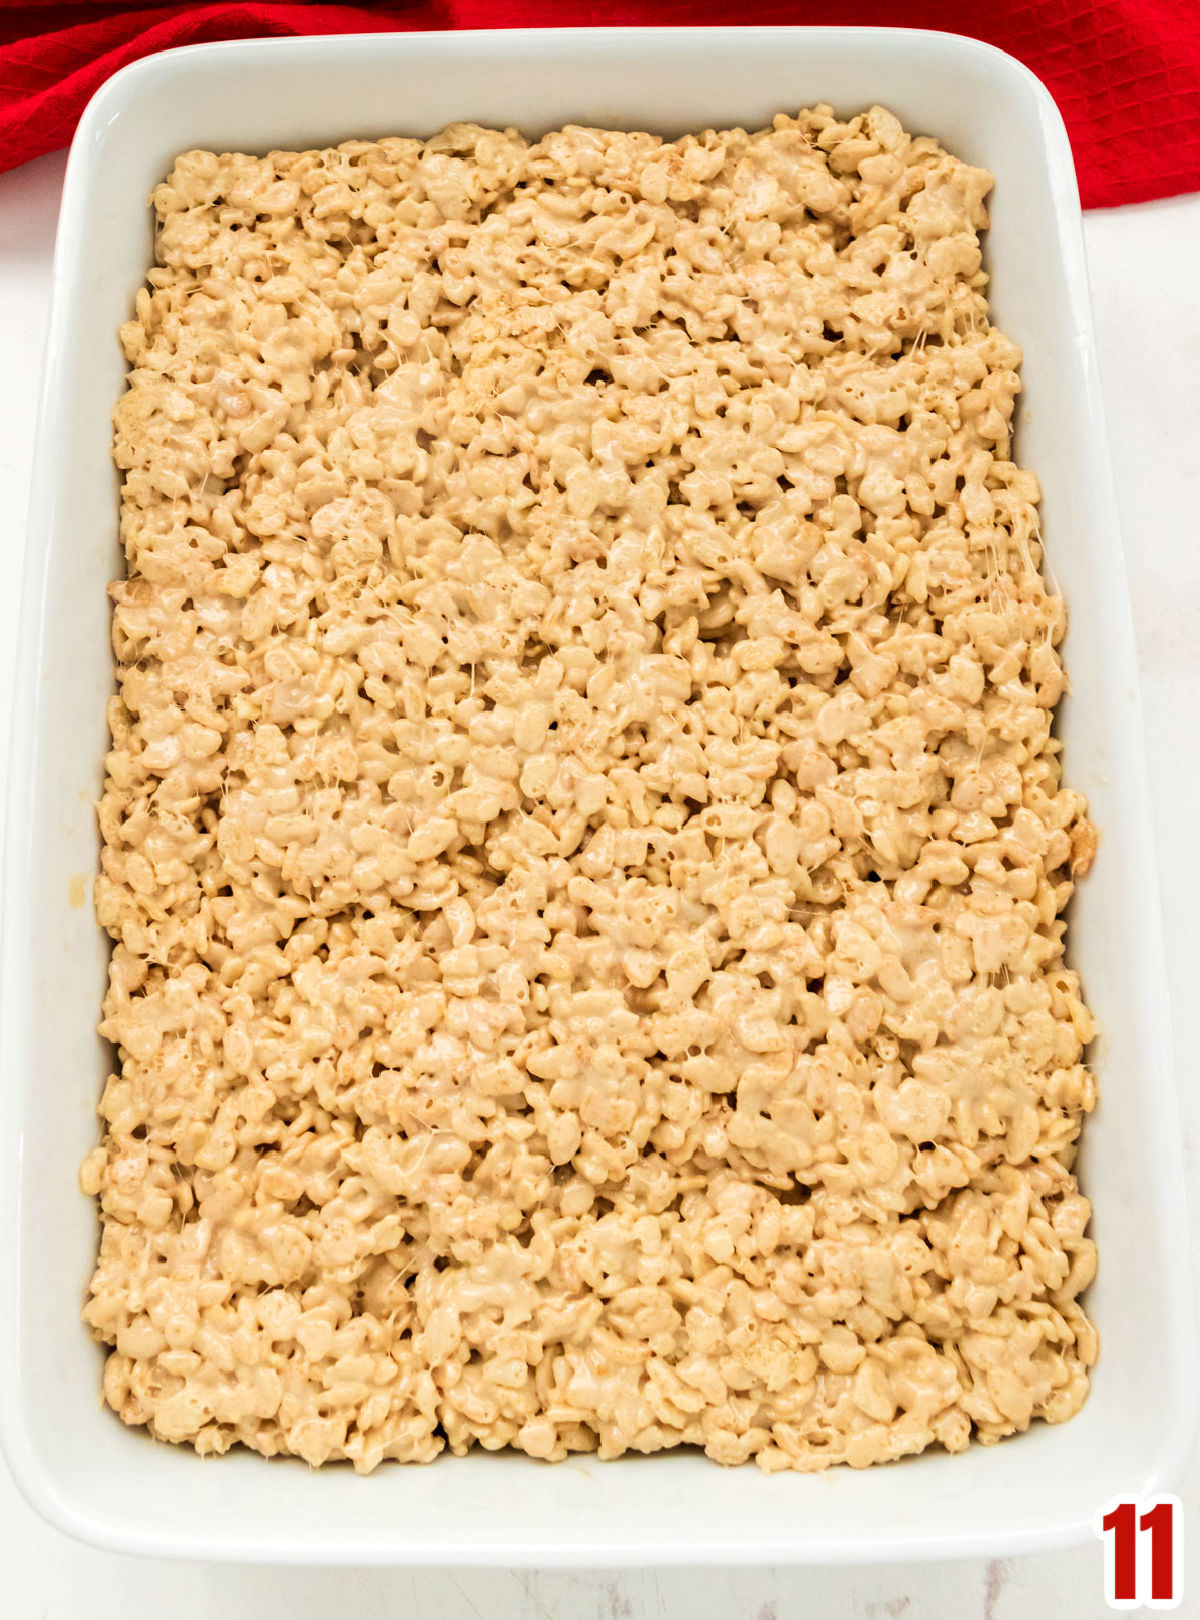 Overhead shot of the Salted Caramel Rice Krispie Treat mixture pressed down into a 9x13" pan.